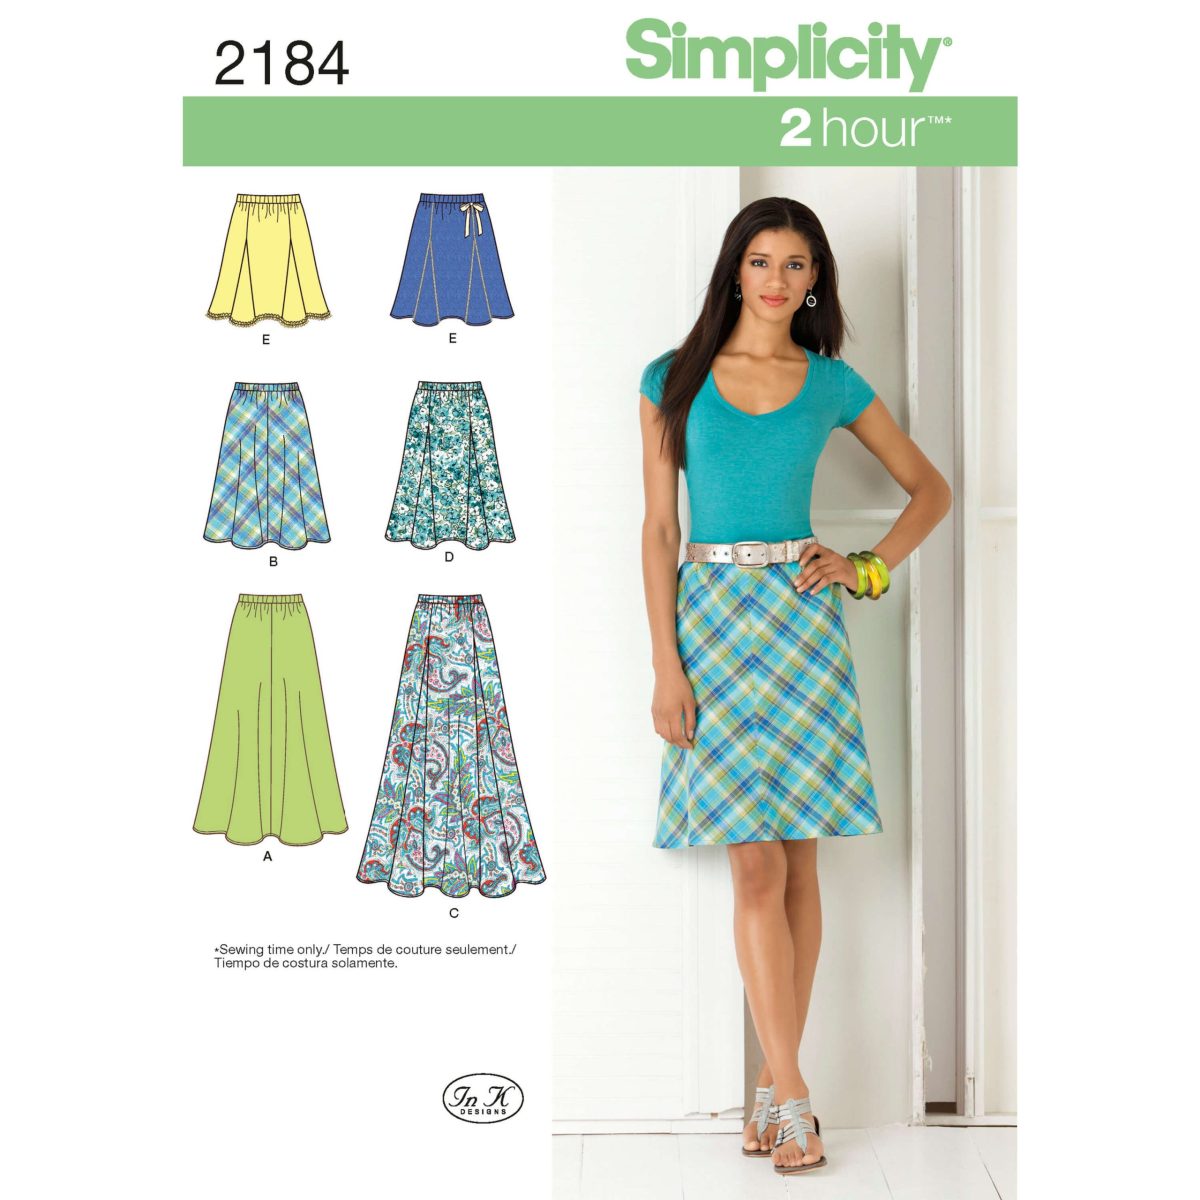 Simplicity Sewing Pattern 2184 Misses' Skirts